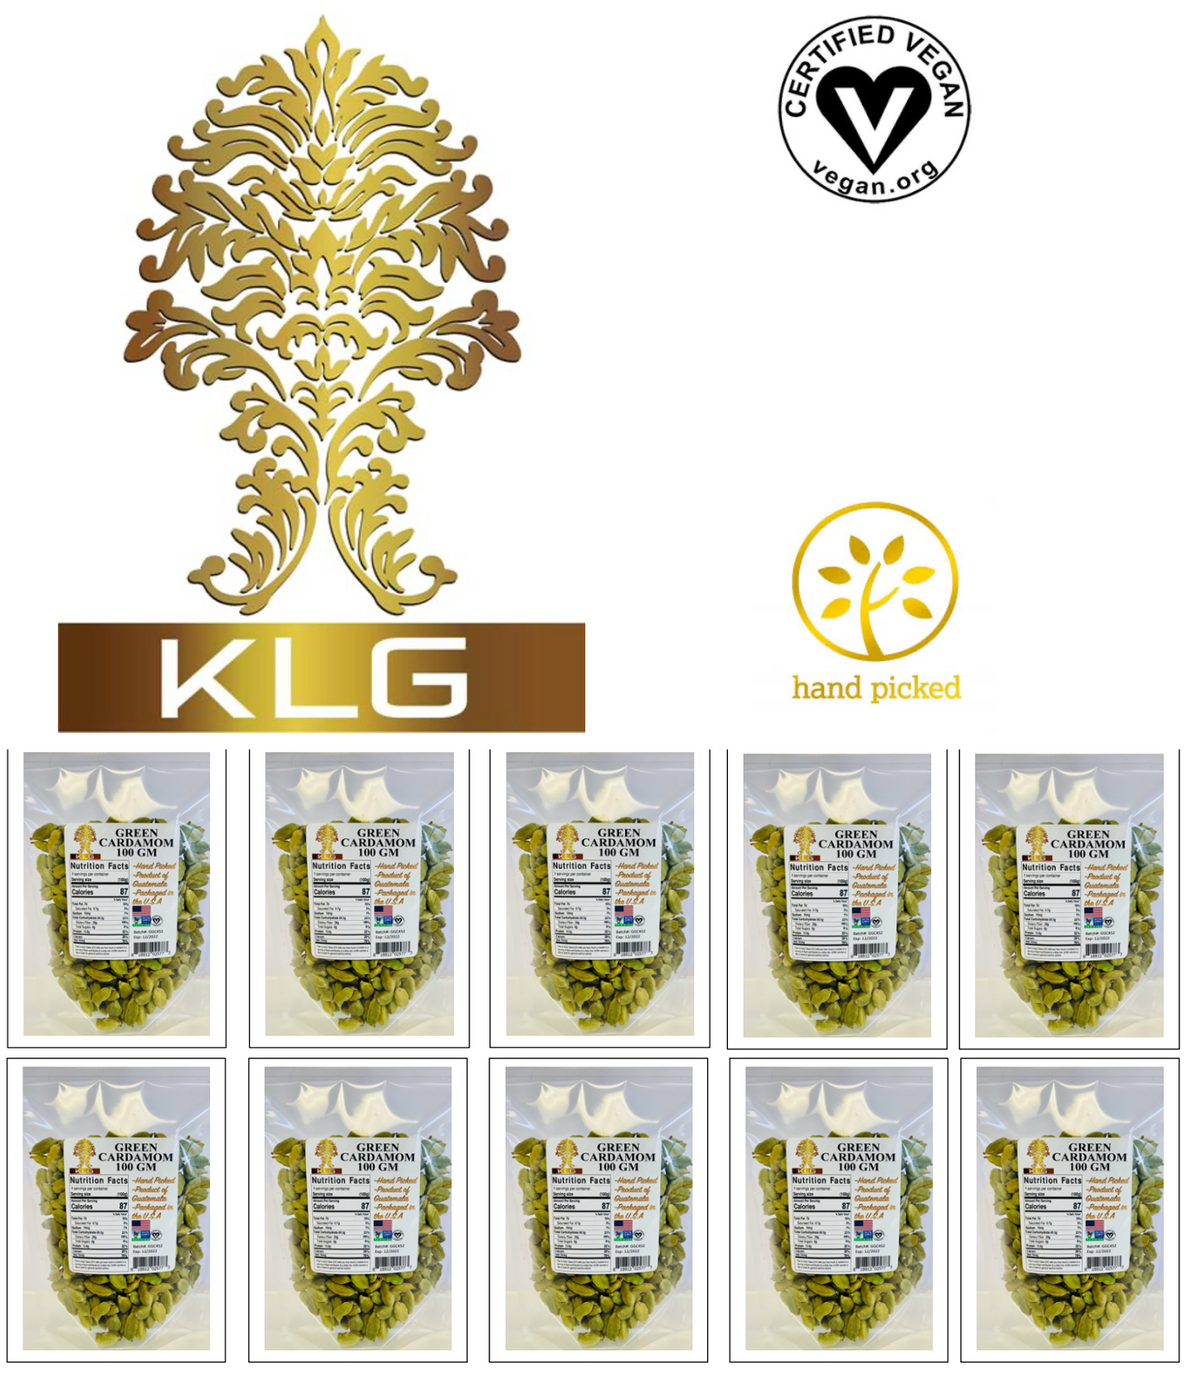 10 Bags Natural Green Whole Cardamom Pods Extra Fancy Grade 100gm Each